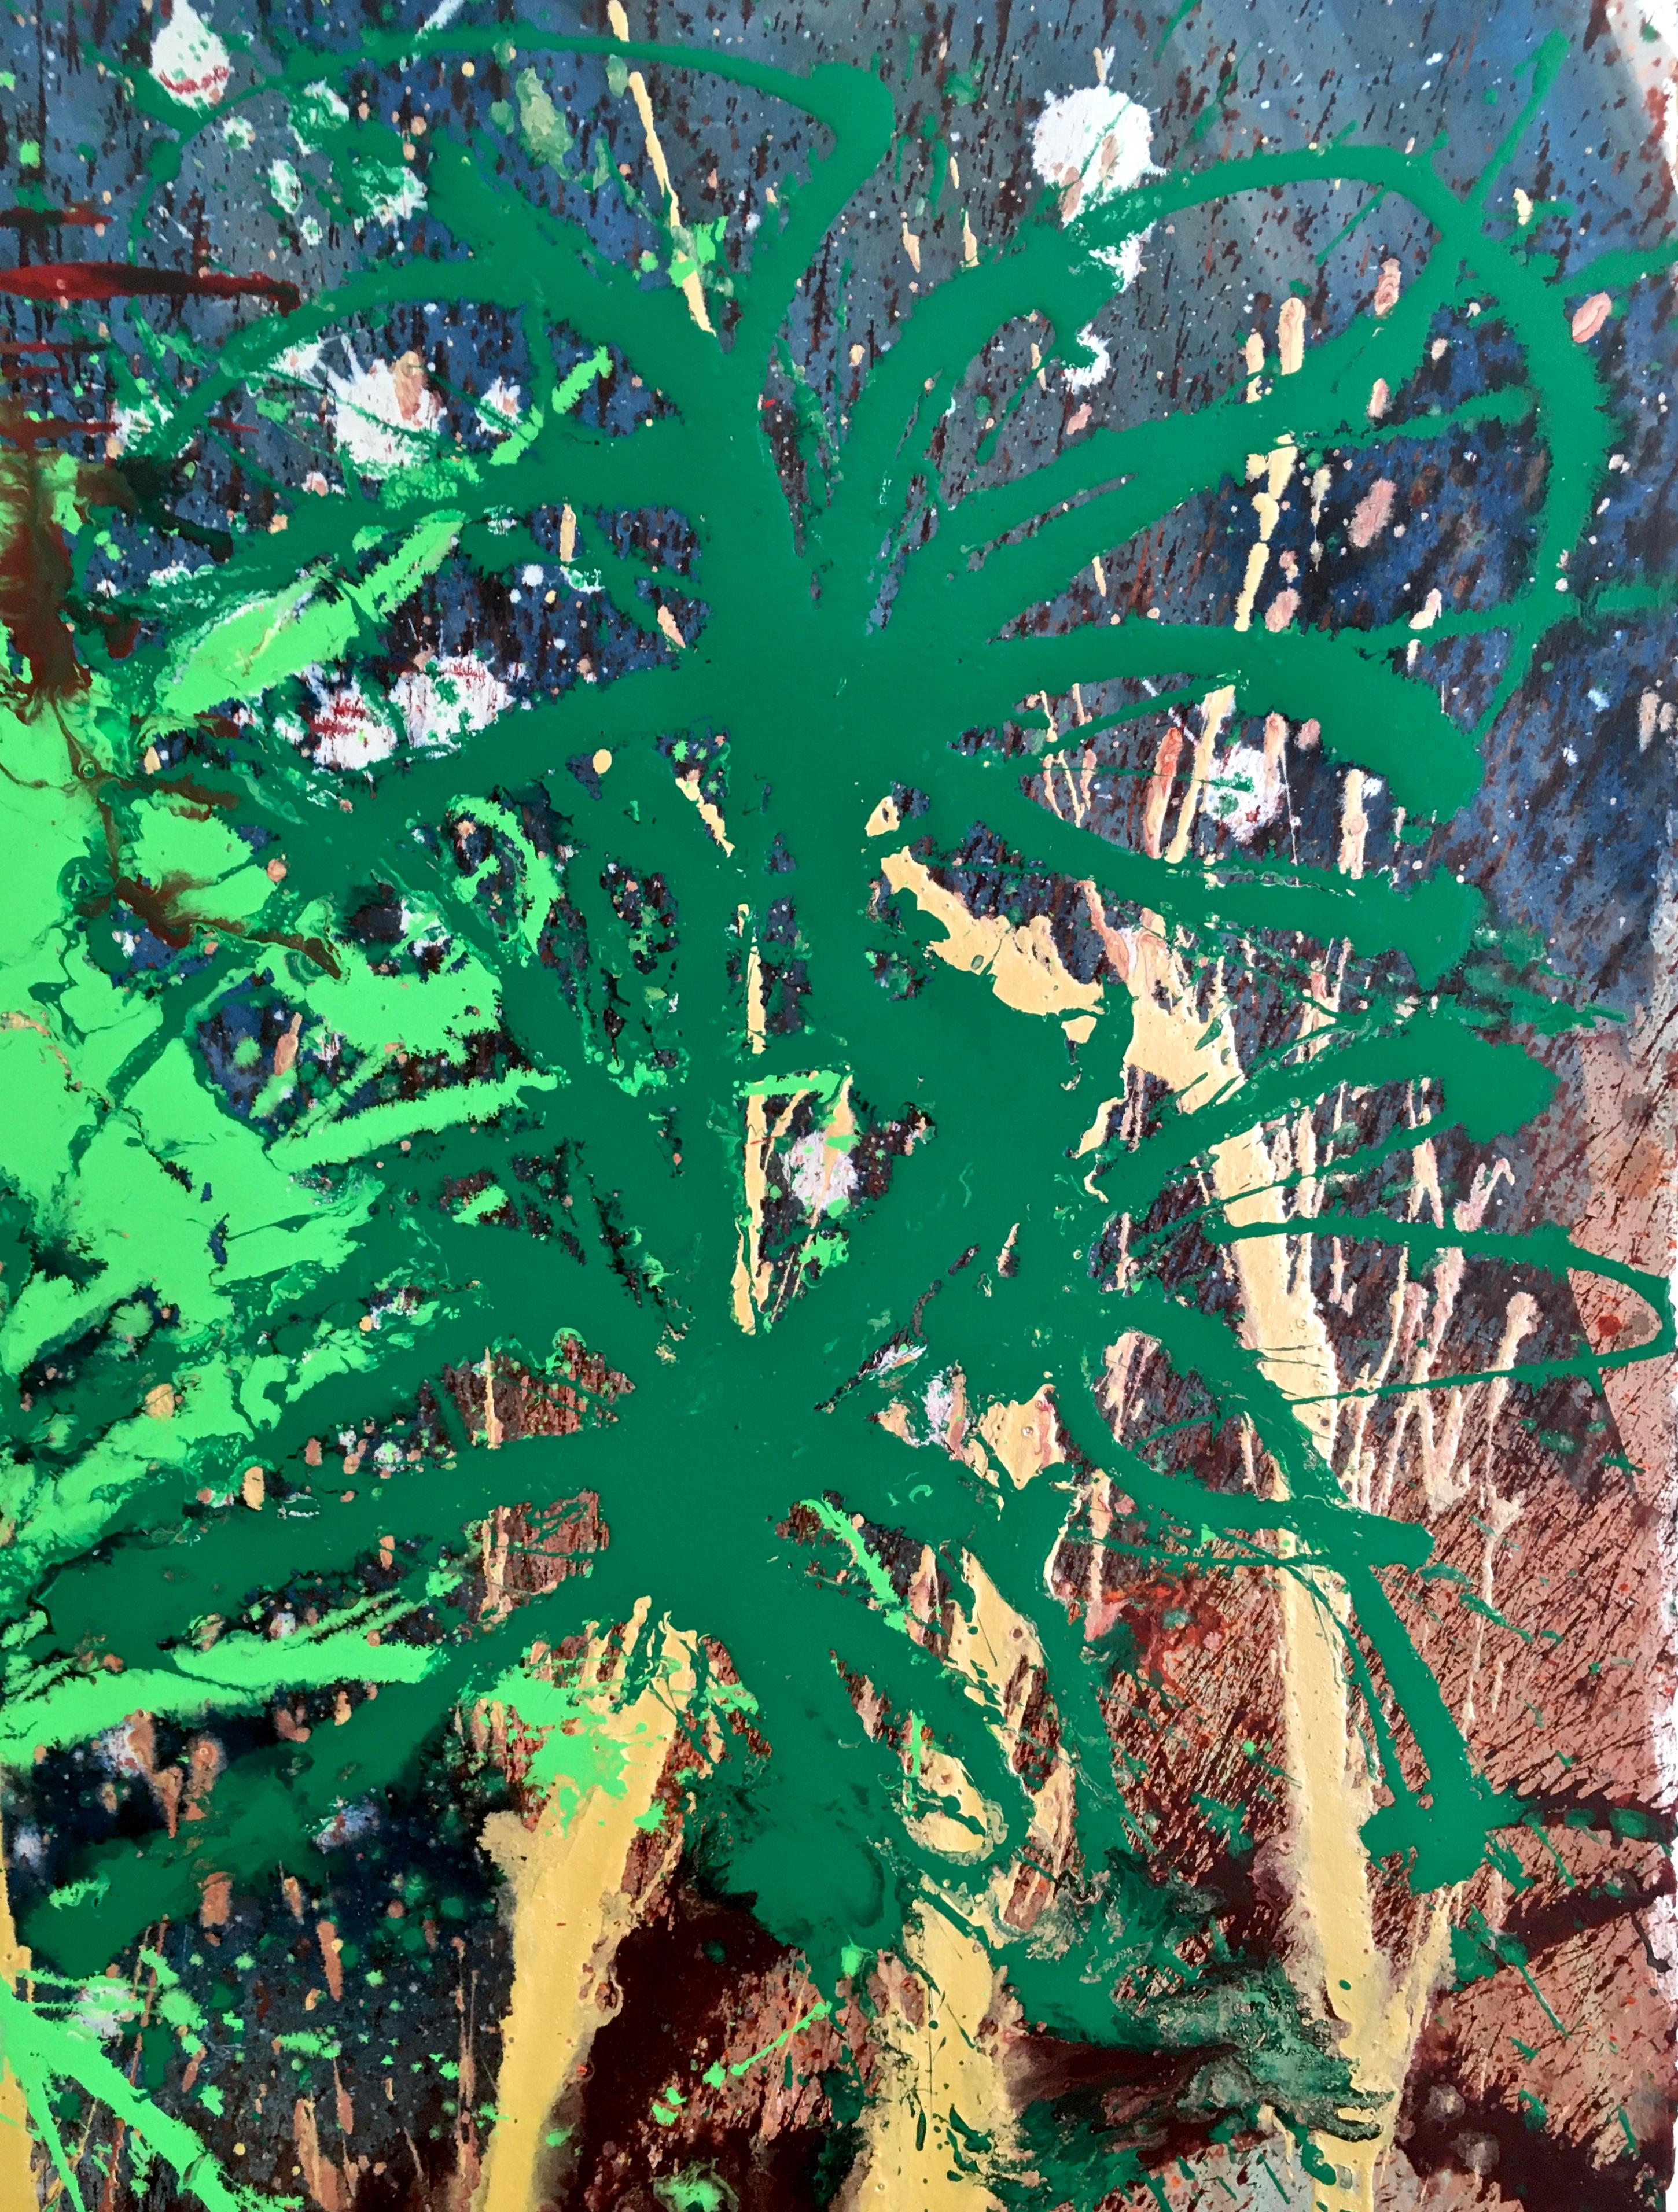 Artist: Dale Chihuly (1941)
Title: Palm Fronds
Year: circa 2000
Medium: Acrylic on heavy Aquarelle paper
Size: 60 x 40 inches
Condition: Excellent
Inscription: Signed by the artist.

DALE CHIHULY (1941-  ) Dale Chihuly has almost single-handedly